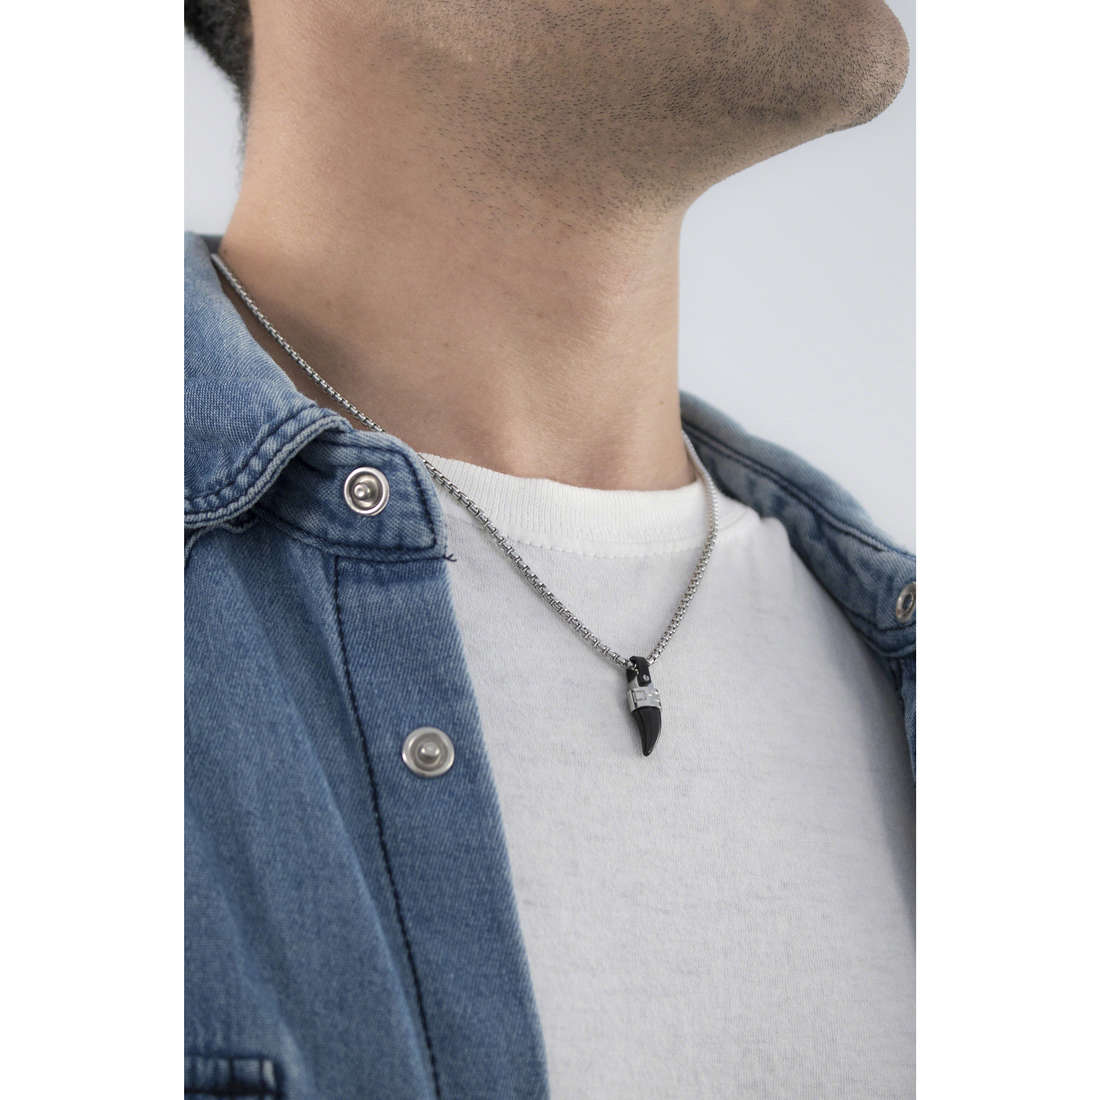 Brosway colliers Sign homme BGN04 Je porte